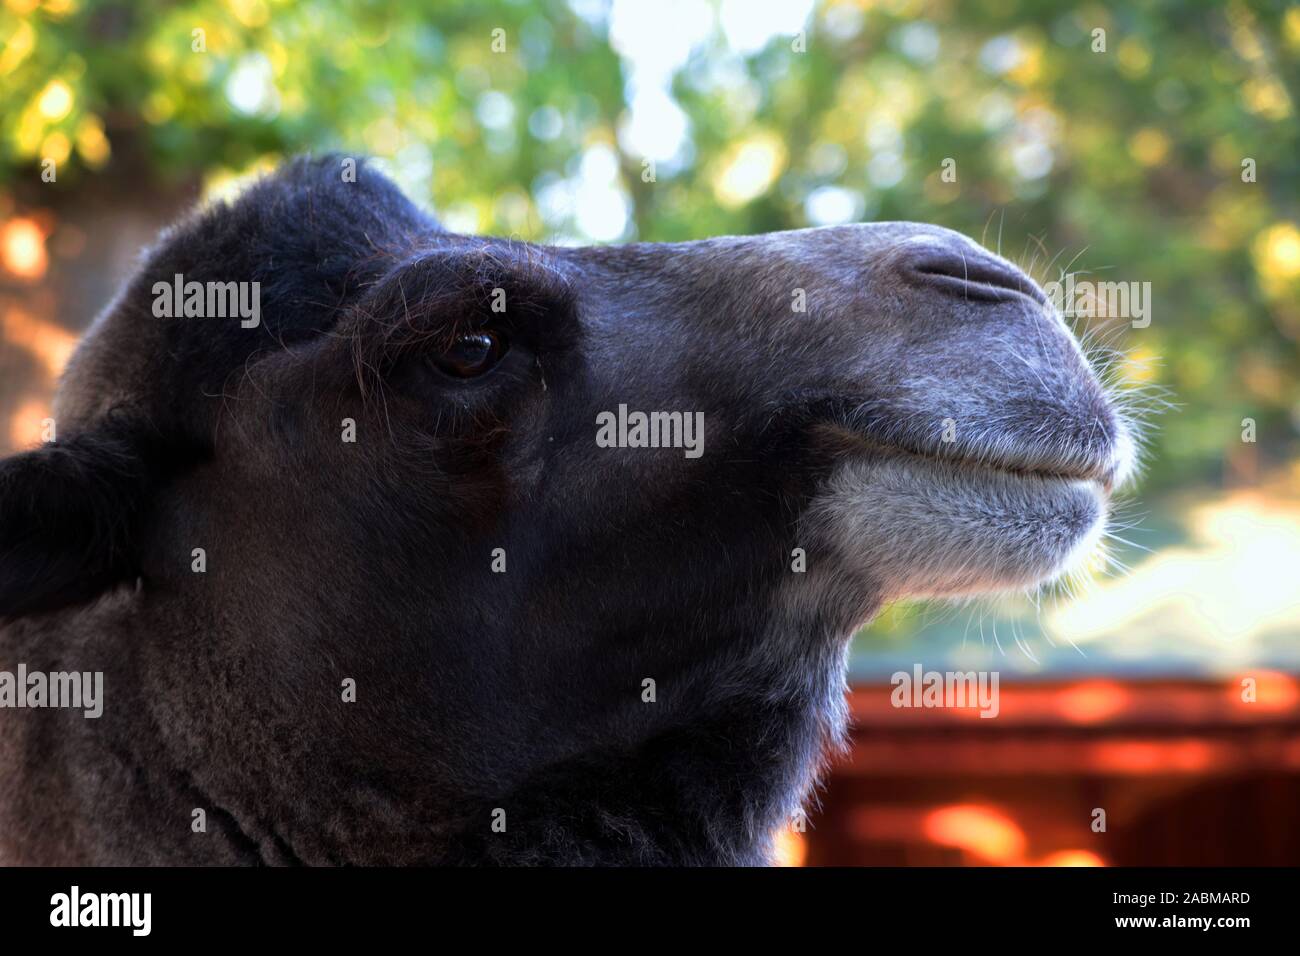 Head of a proud camel looking into the distance. Siberian Zoo. Summer. Stock Photo